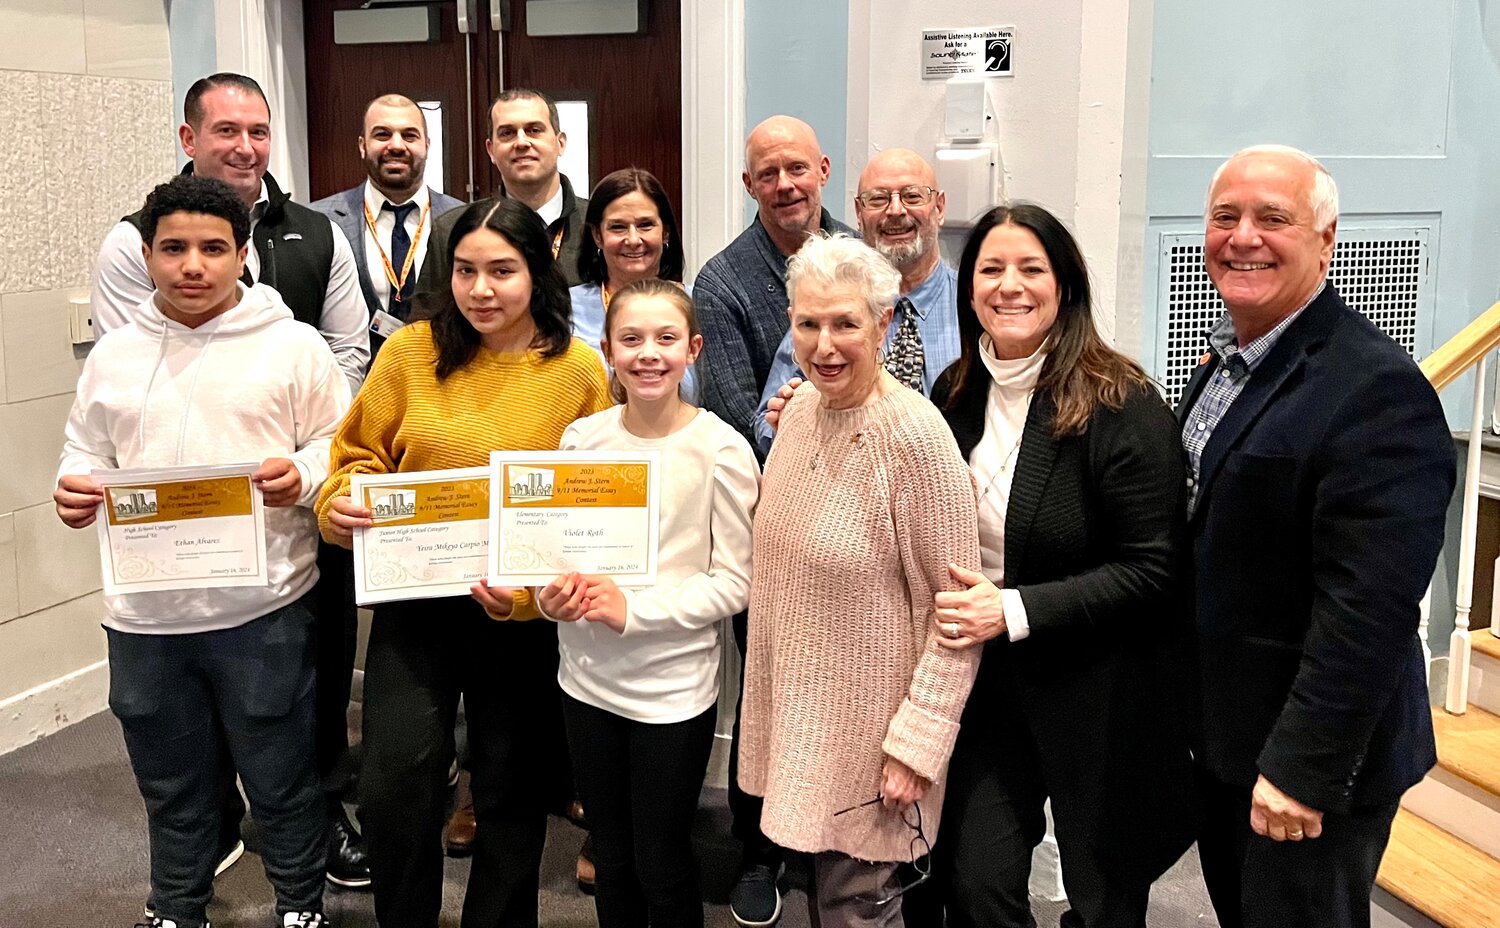 This year’s winners of the Andrew J. Stern Memorial Essay Contest Ethan Alvarez, Yeira Malaga, and Violet Roth being honored by members of the Stern family, Board of Education, and administration.